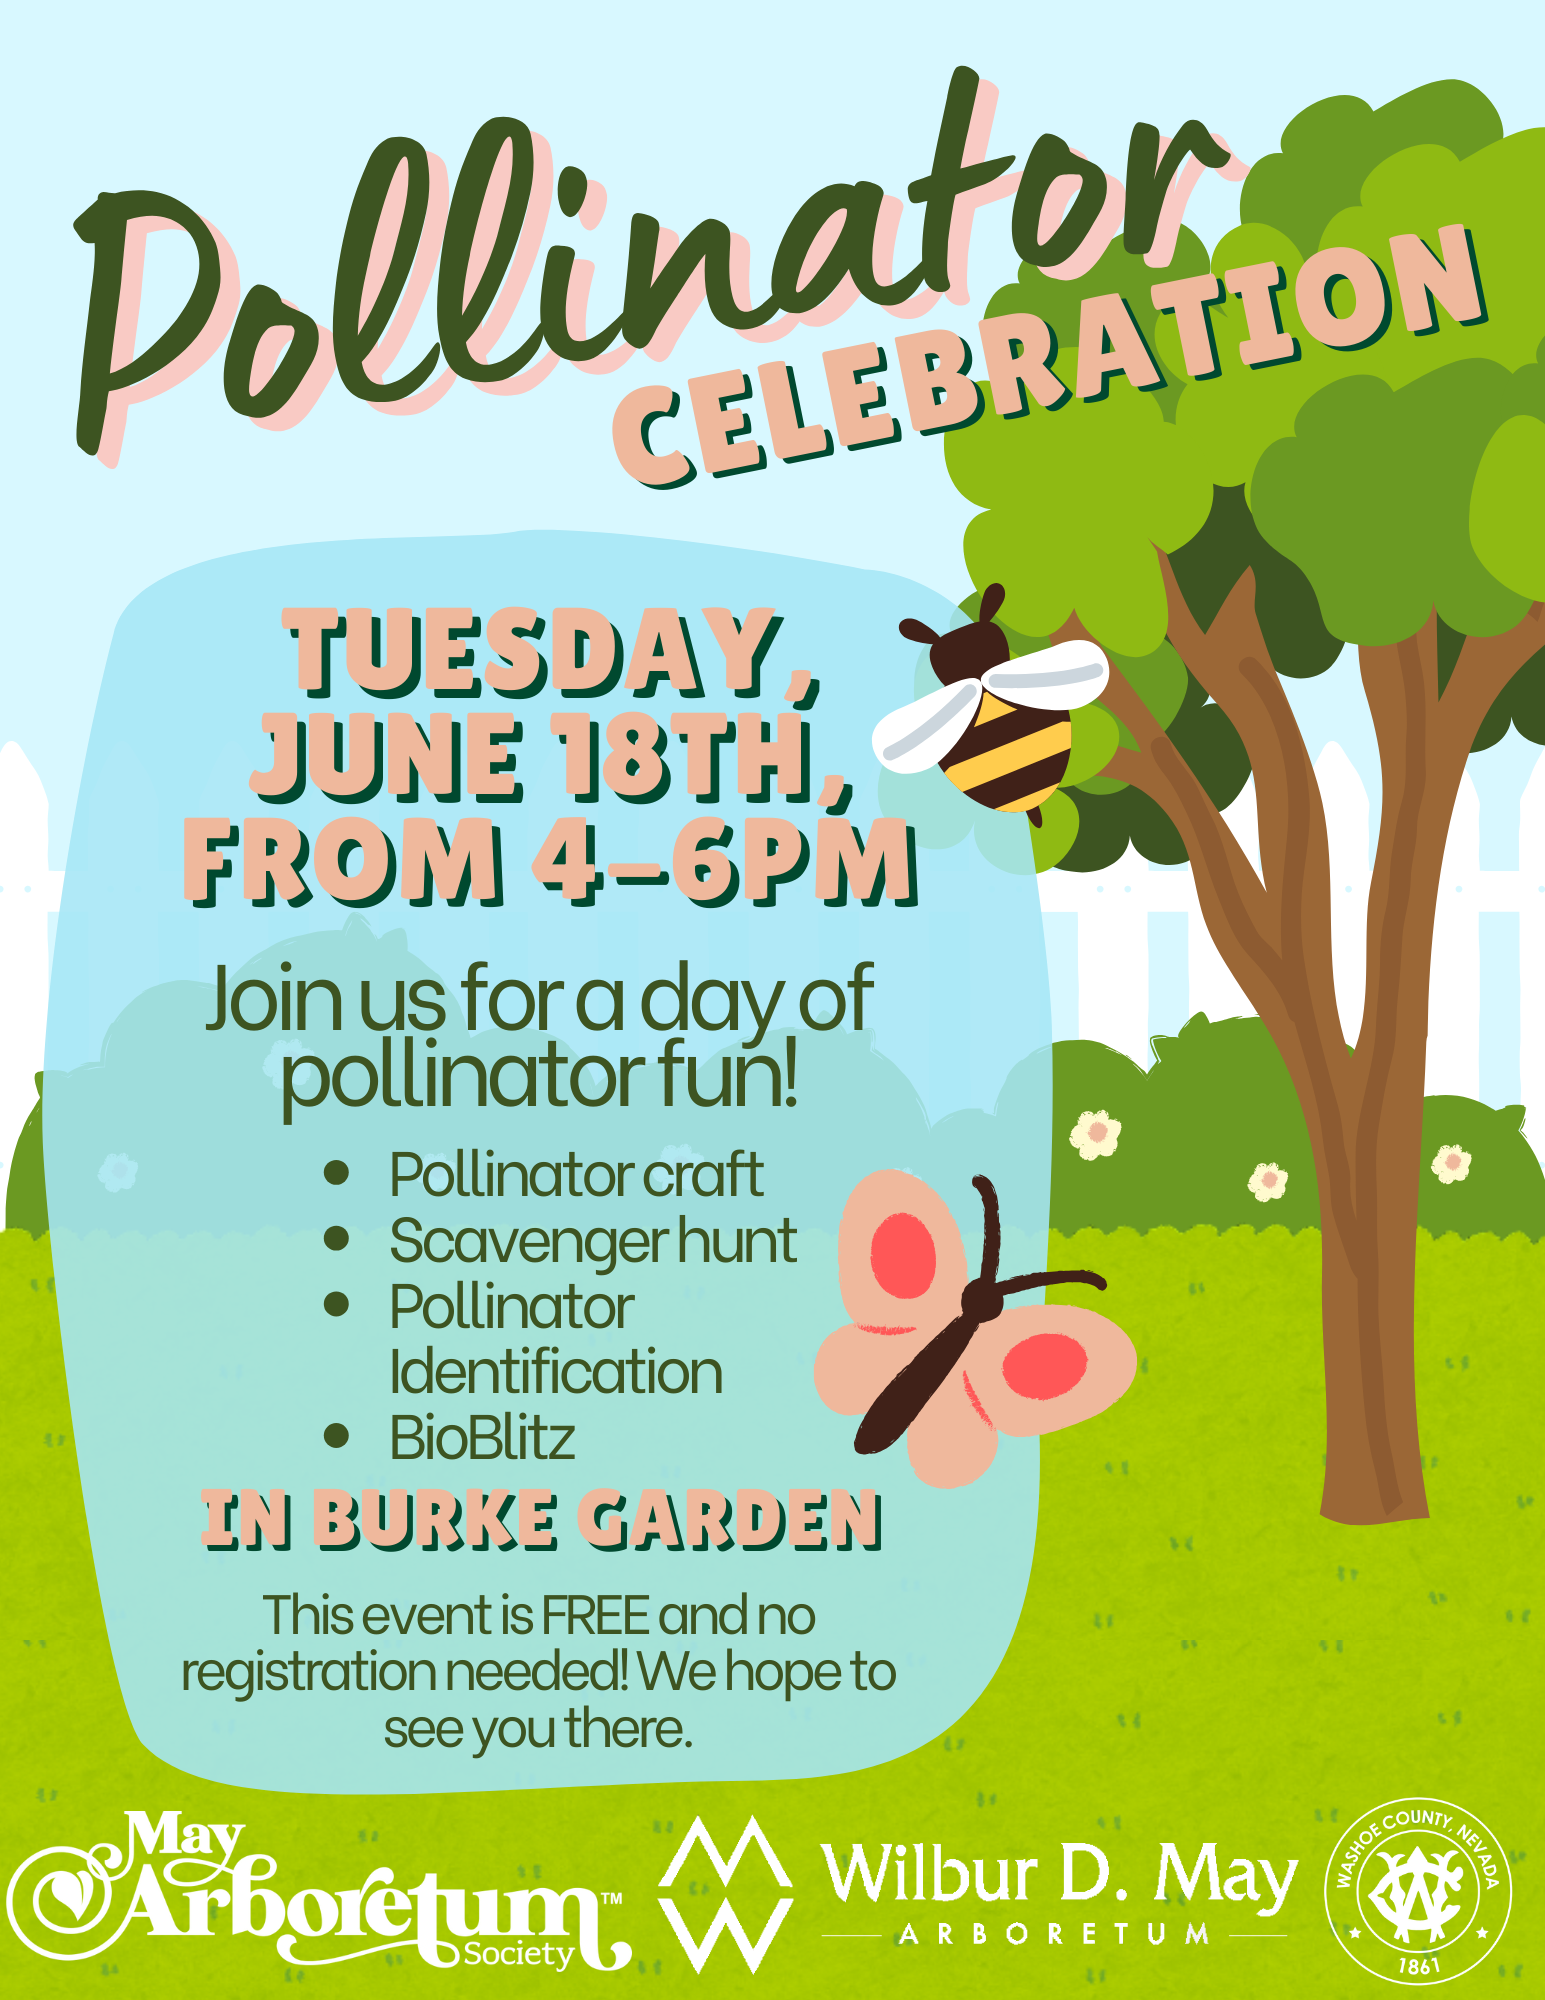 Flyer detailing pollinator day event, details repeated in text of website.